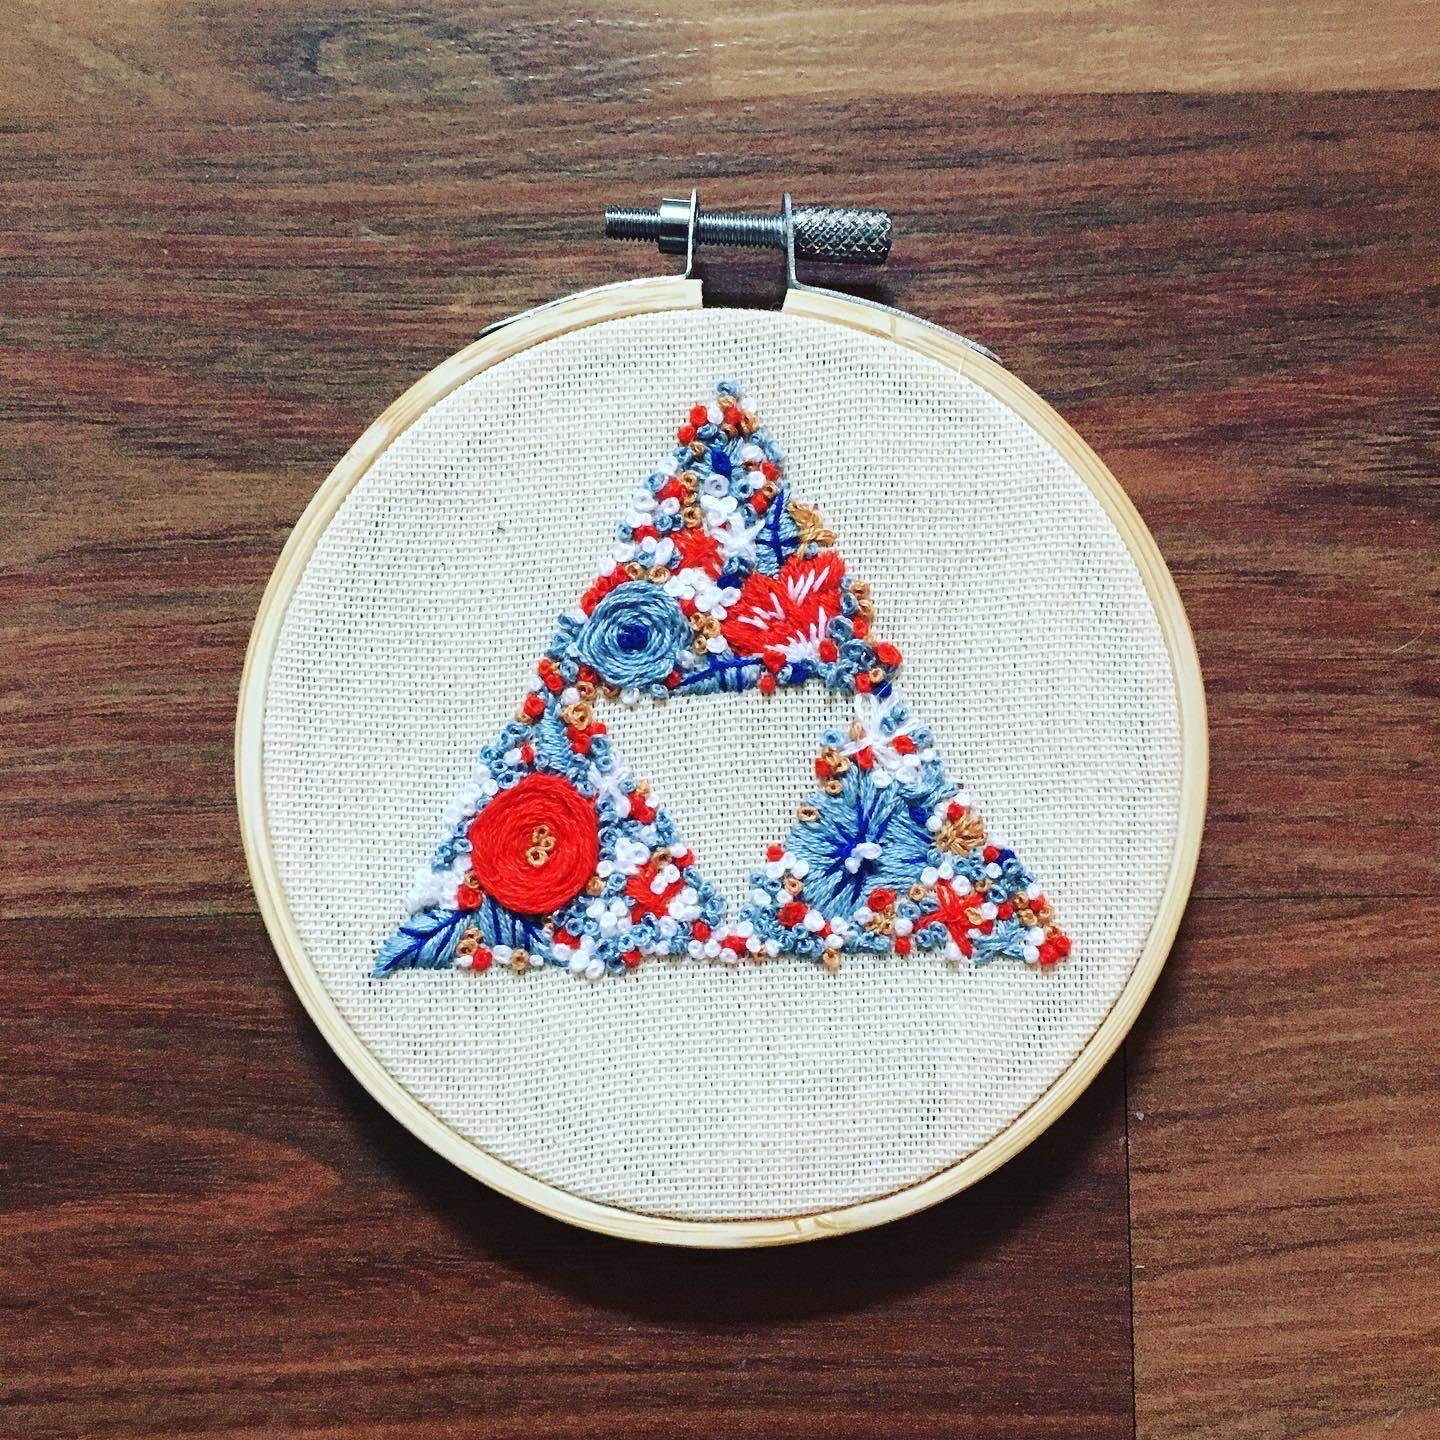 Triforce Embroidery